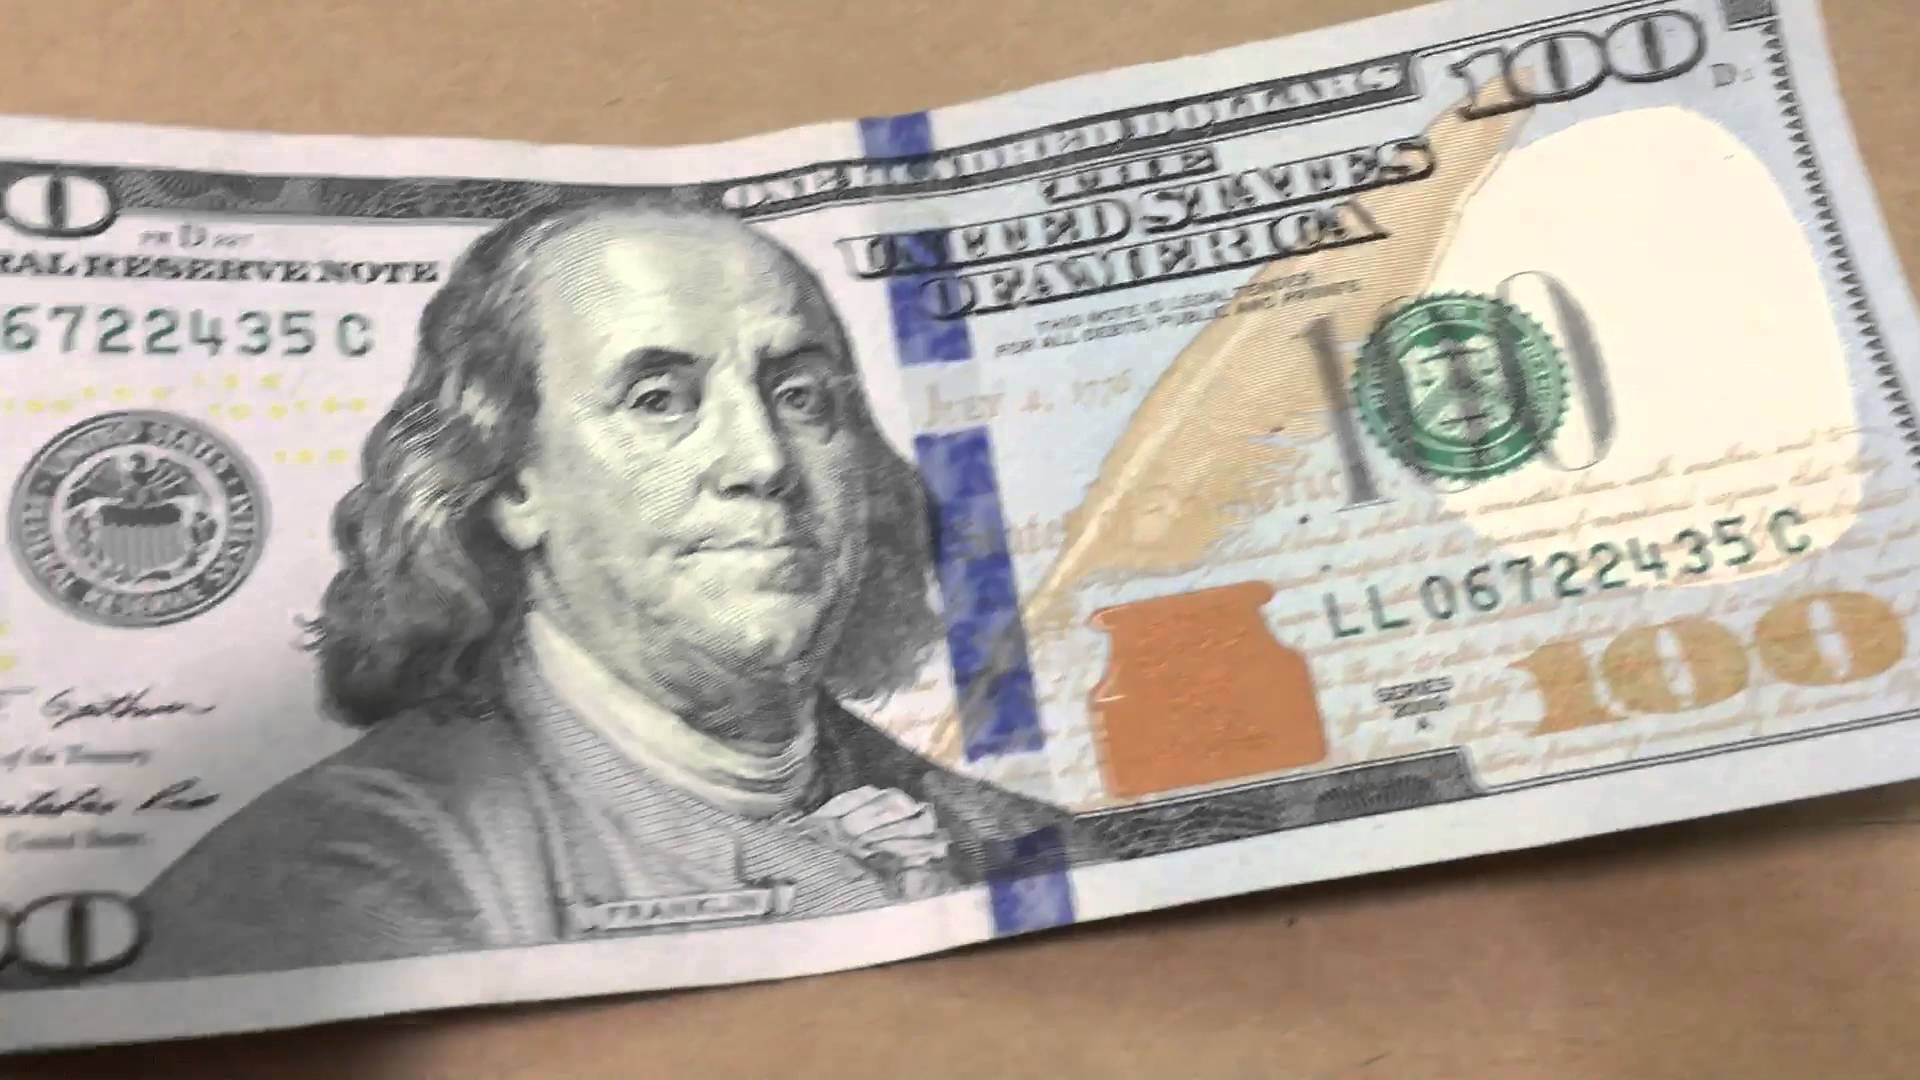 How To Tell if The New $100 Dollar Bill is Real - YouTube